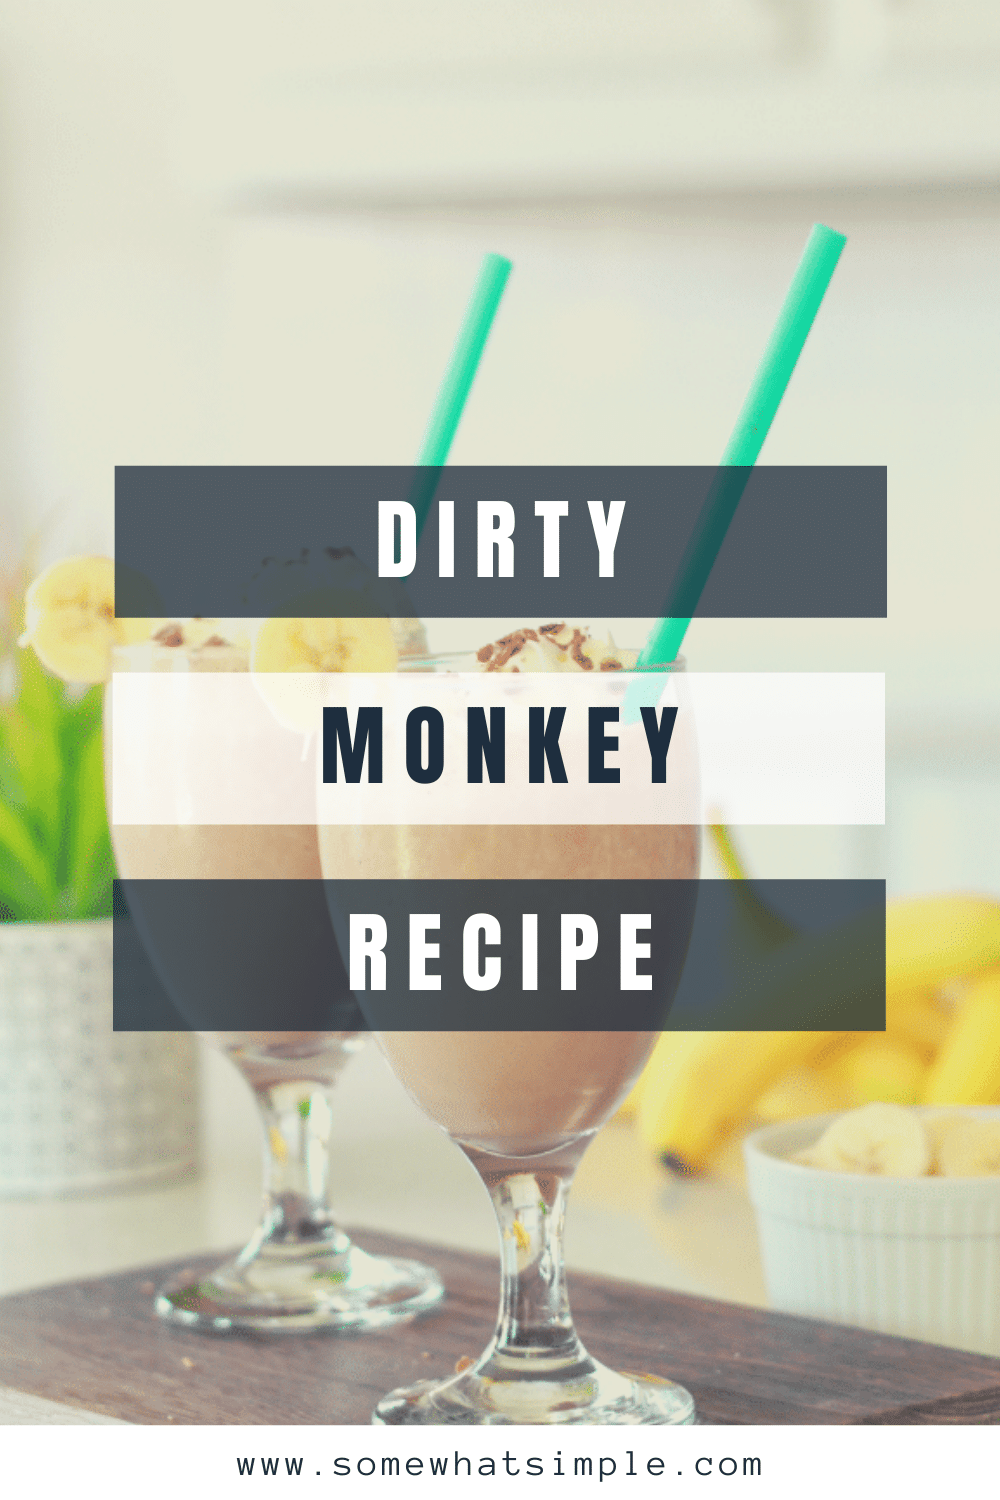 This dirty monkey mocktail is creamy, delicious, and refreshing! Made with just 4 simple ingredients, you (and the kids!) will love it! via @somewhatsimple